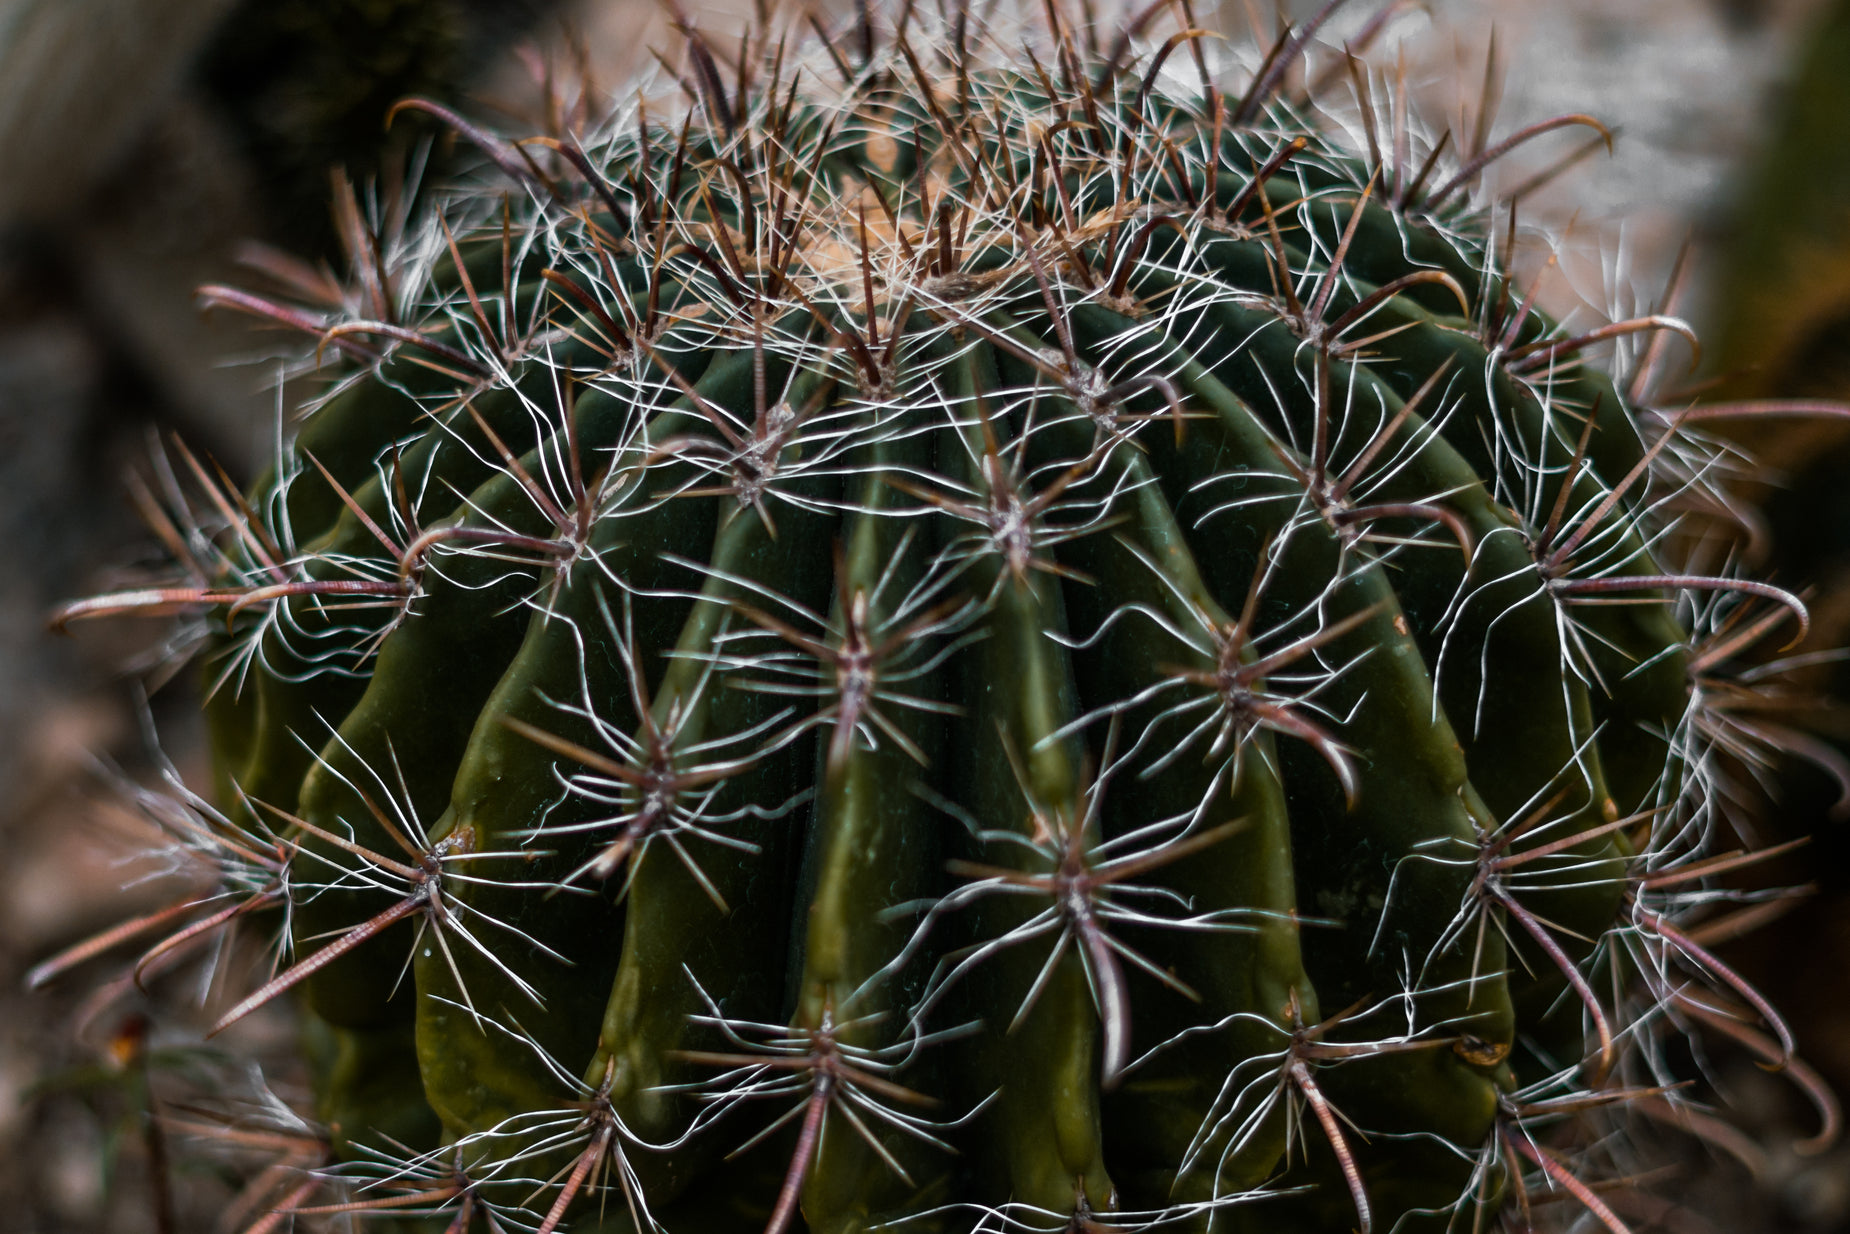 the large, tall cactus has little buds on it